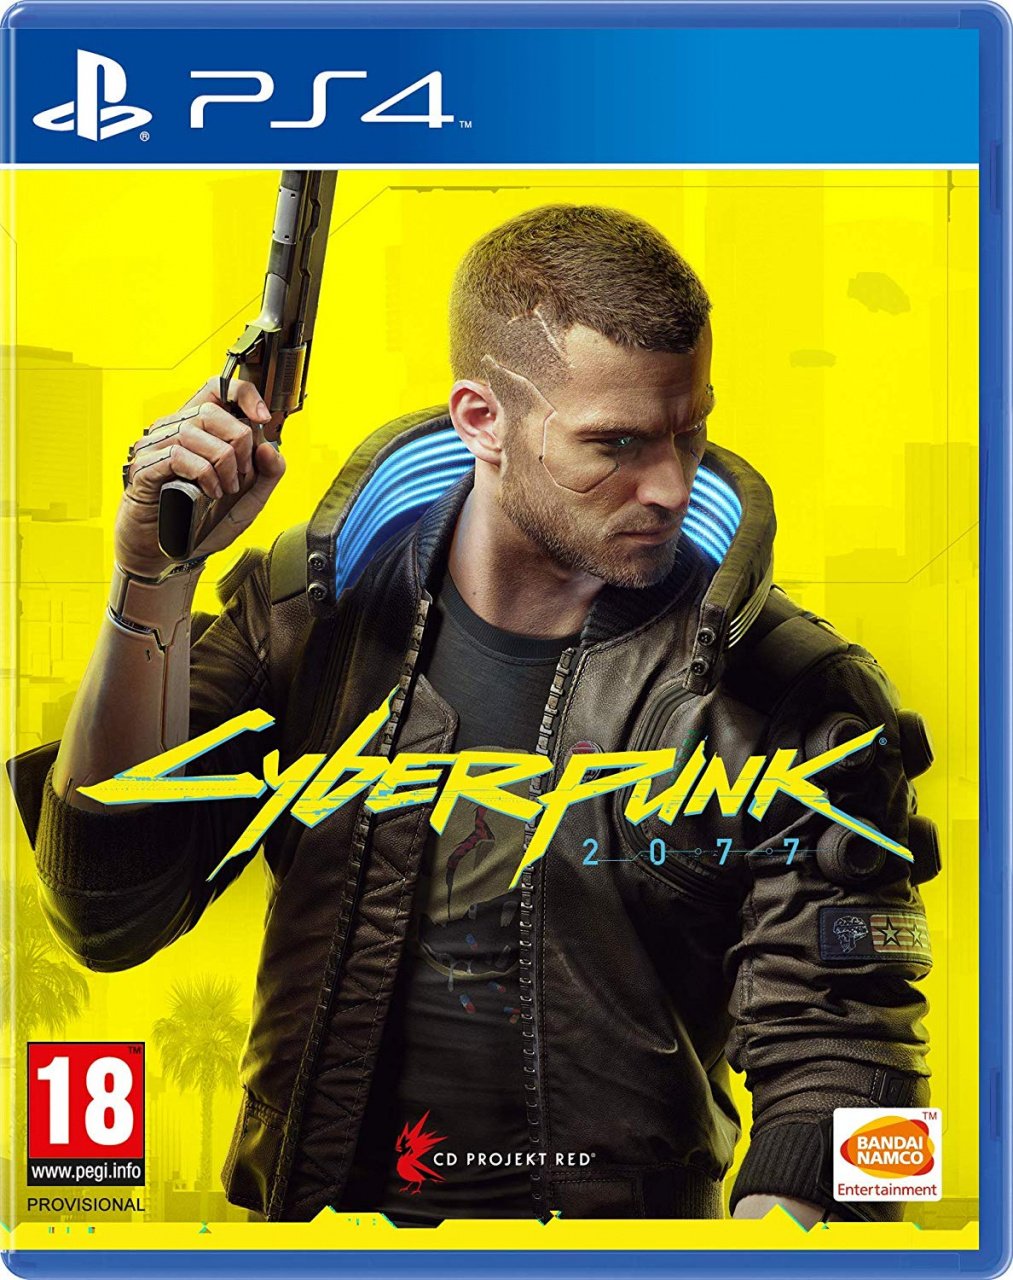 [IMAGE:http://images.pushsquare.com/44d8c567ed72a/cyberpunk-2077s-cover-featuring-male-v.large.jpg]